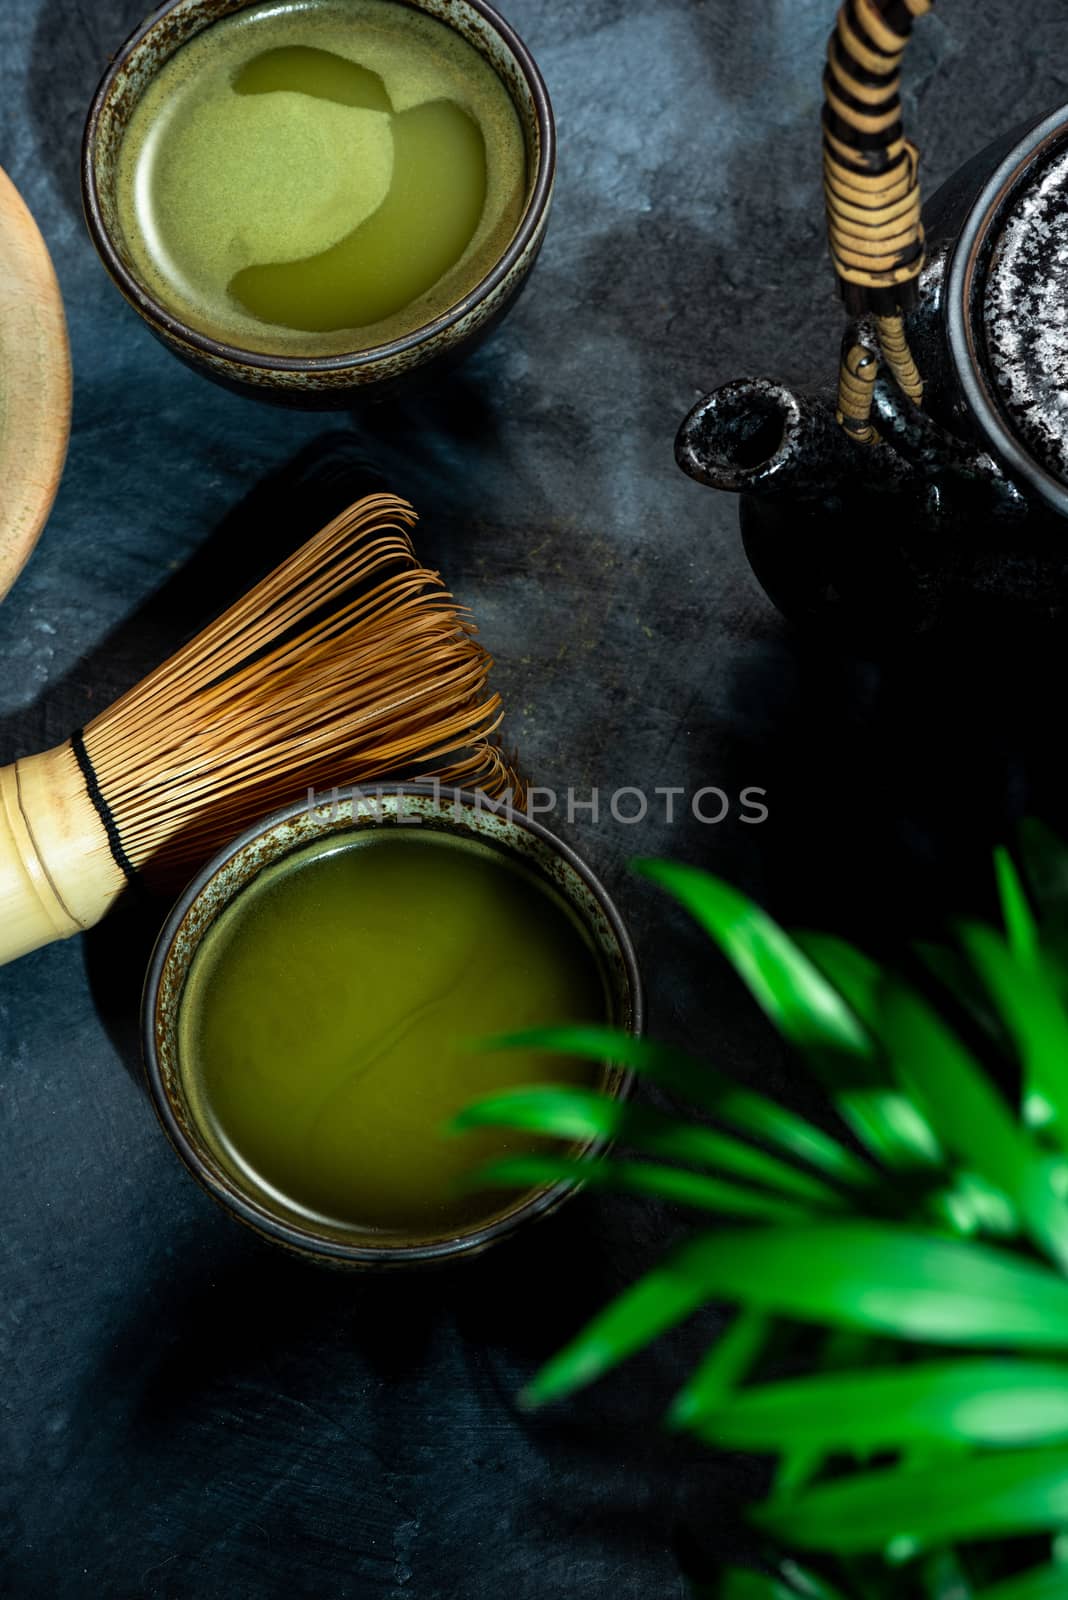 Drinking Green Matcha Tea. Japanese or Asian Healthy Bewerage by merc67